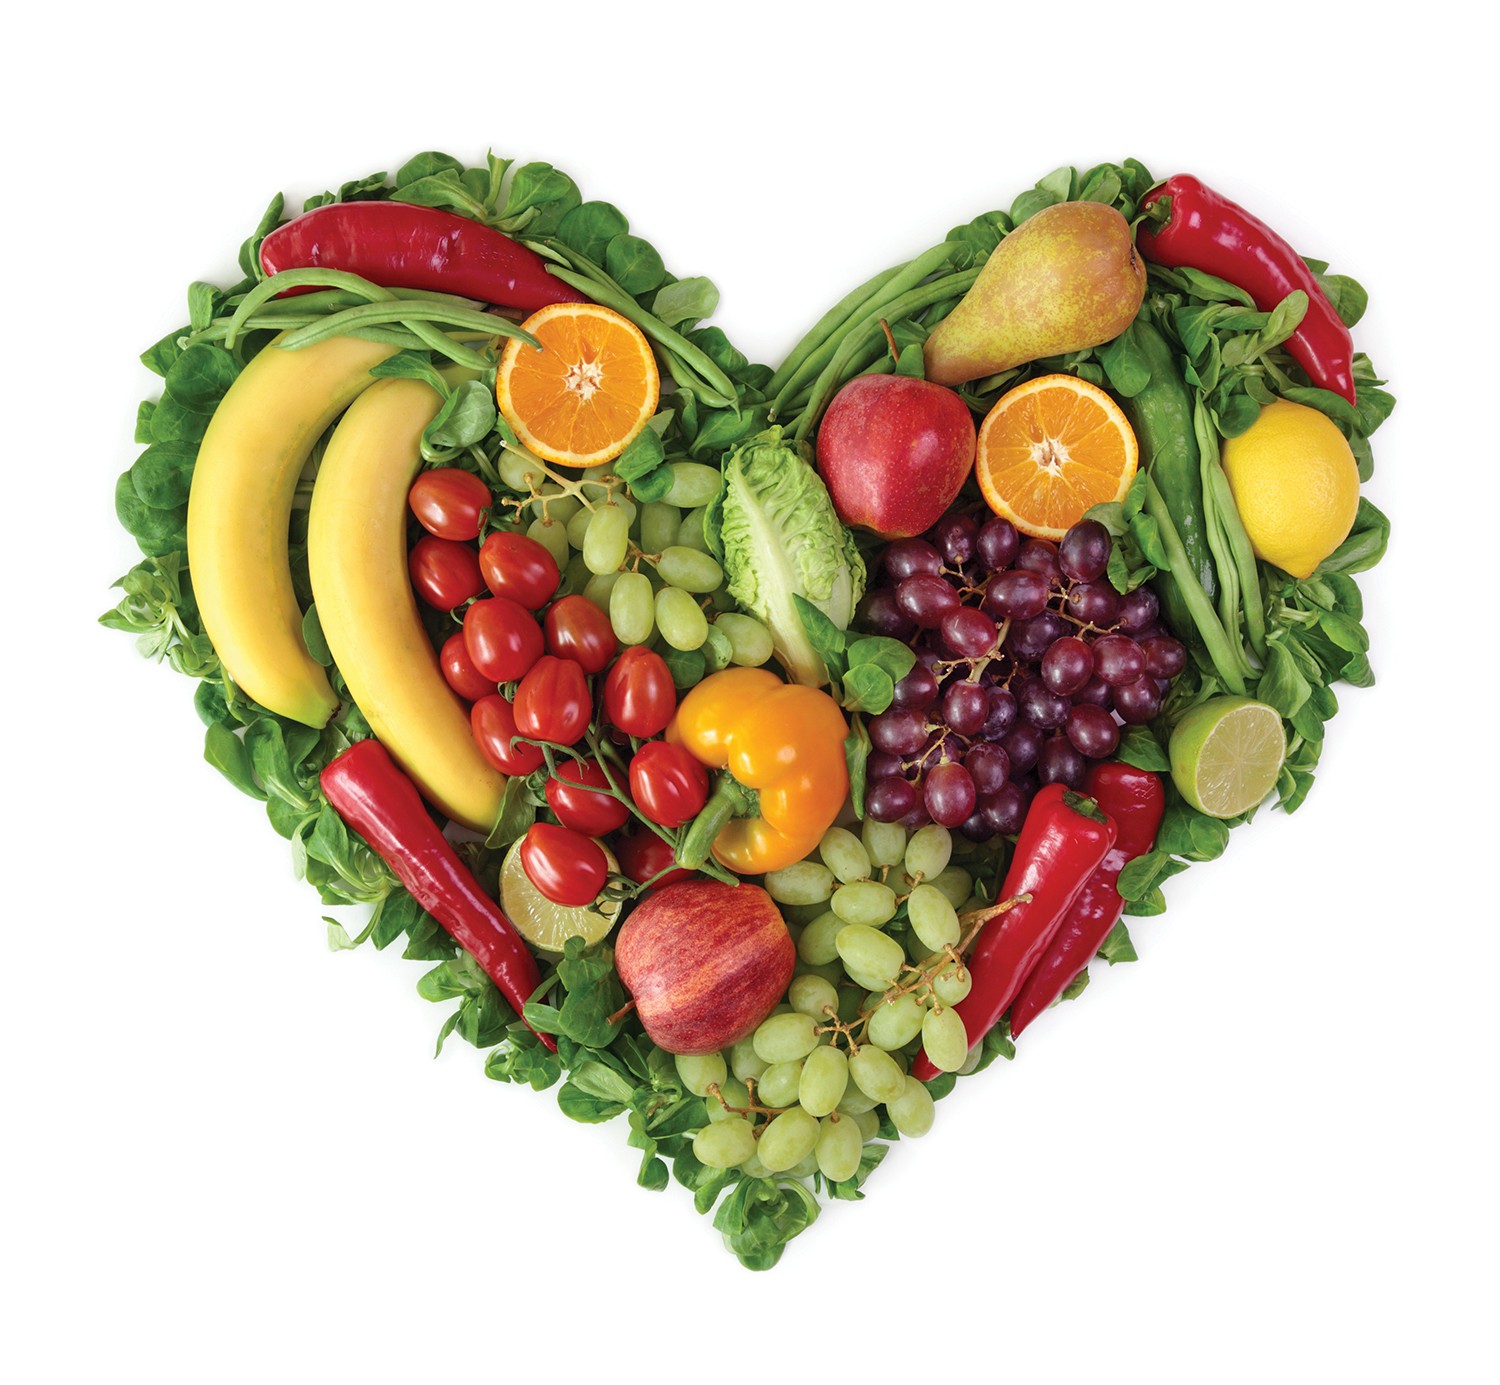 Heart of fruits and vegetables